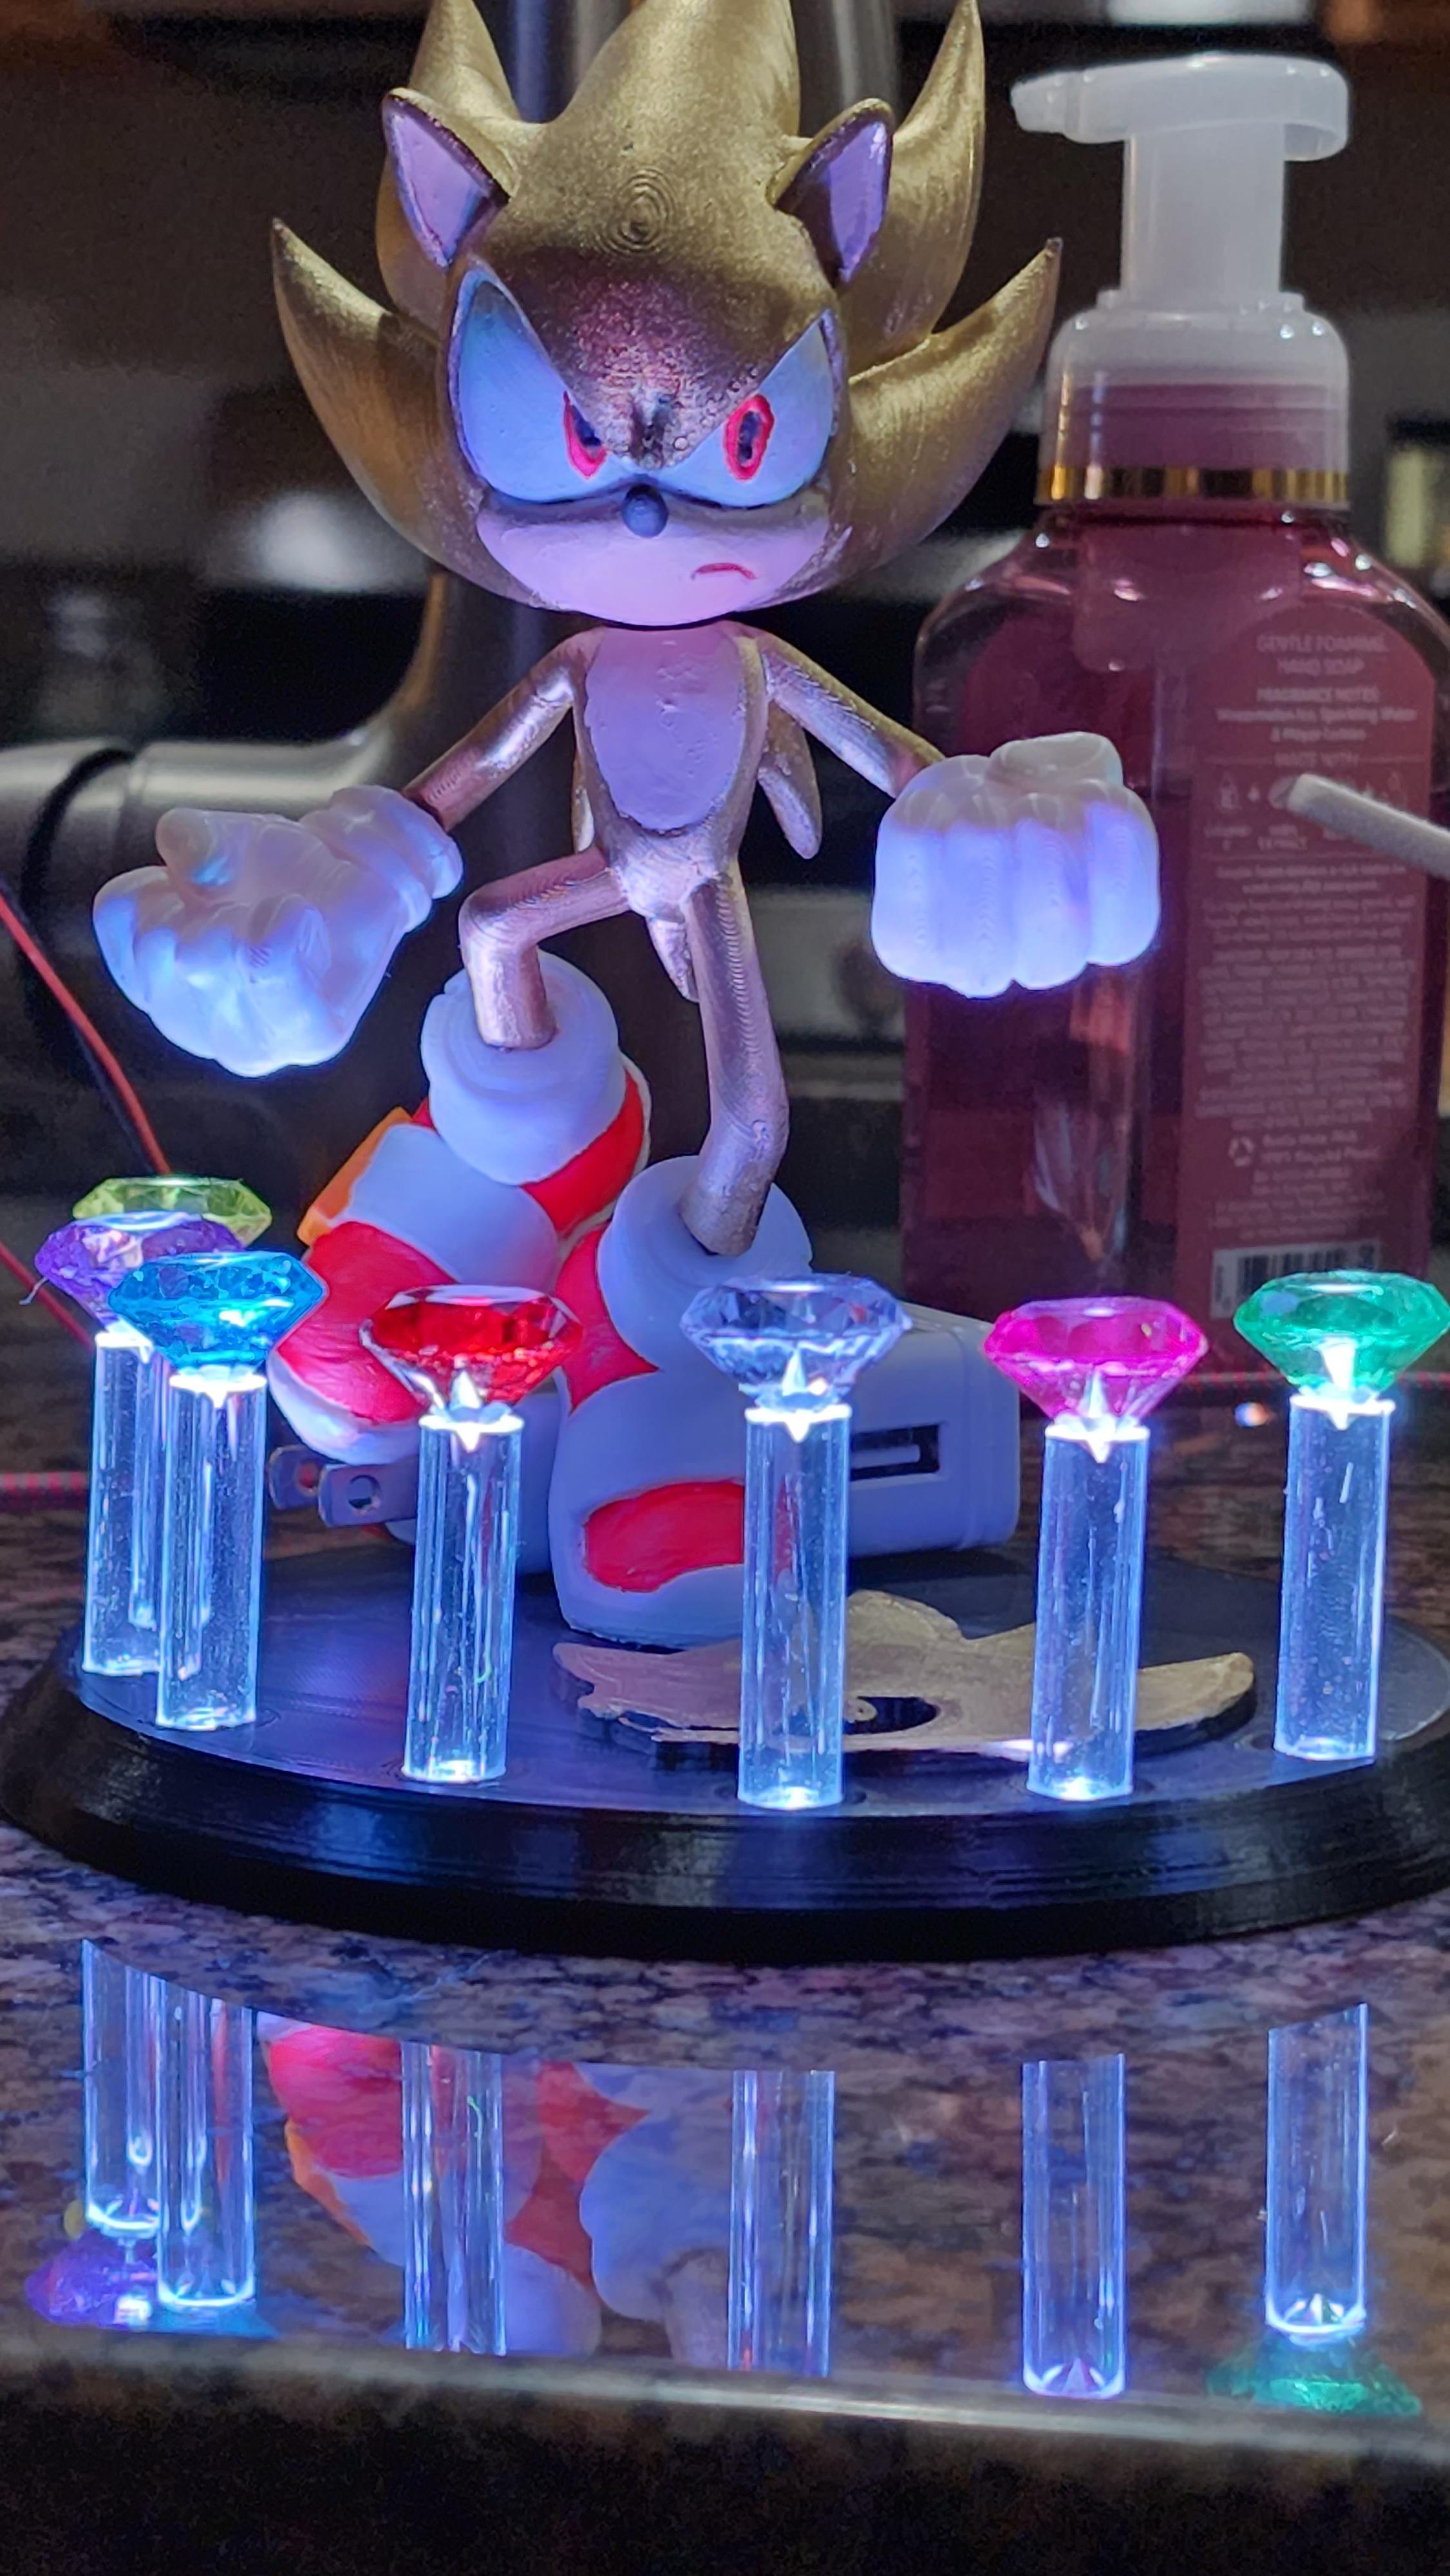 Super Sonic - Sonic the Hedgehog - Fan Art - Modified the base to allow for 7 acrylic tubes to hold "Chaos Emeralds" that could be lit using WS2812 (aka NeoPixel) LEDs with an Arduino. - 3d model